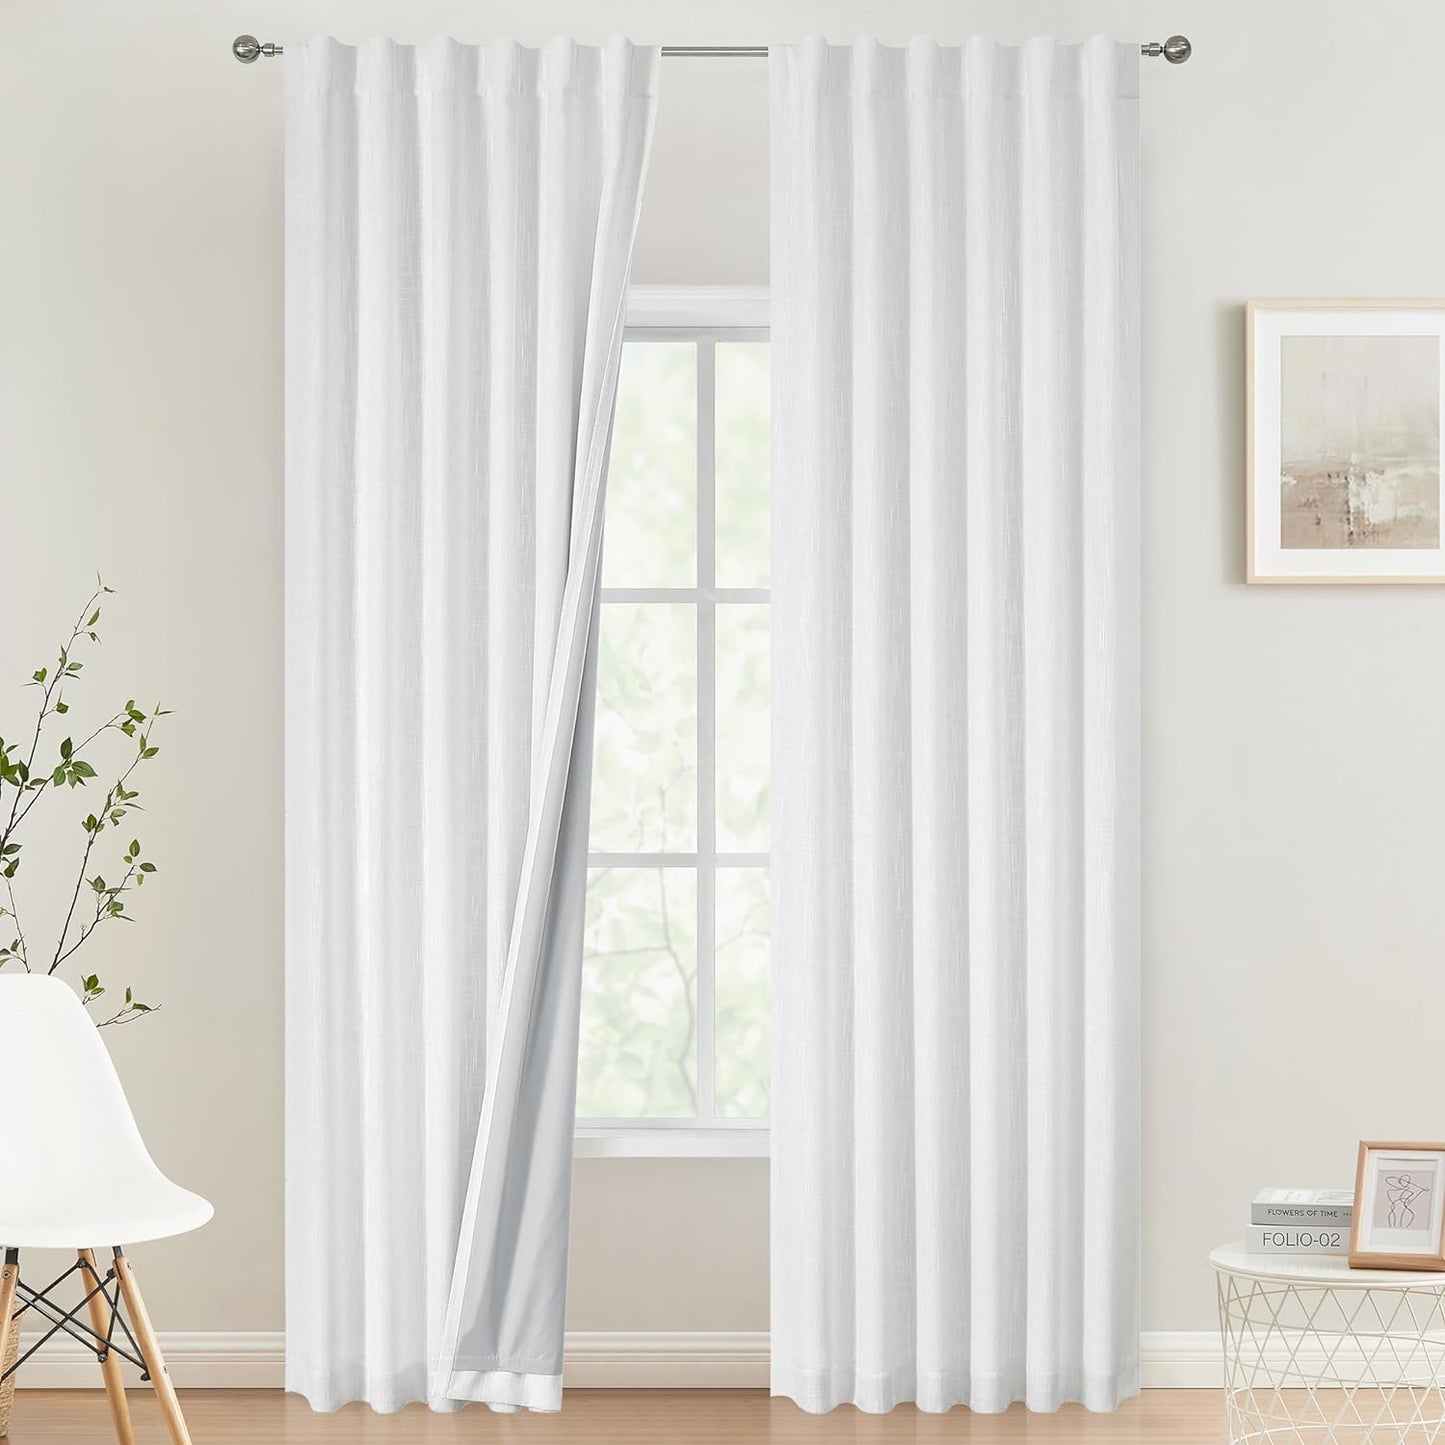 Vision Home Beige Full Blackout Curtains 84 Inch for Bedroom Living Room Darkening Farmhouse Window Treatment Panels Thermal Insulated Rod Pocket Back Tab Soundproof Linen Drapes 2 Panels 50" Wx84 L  Vision Home White 50"X84"X2 